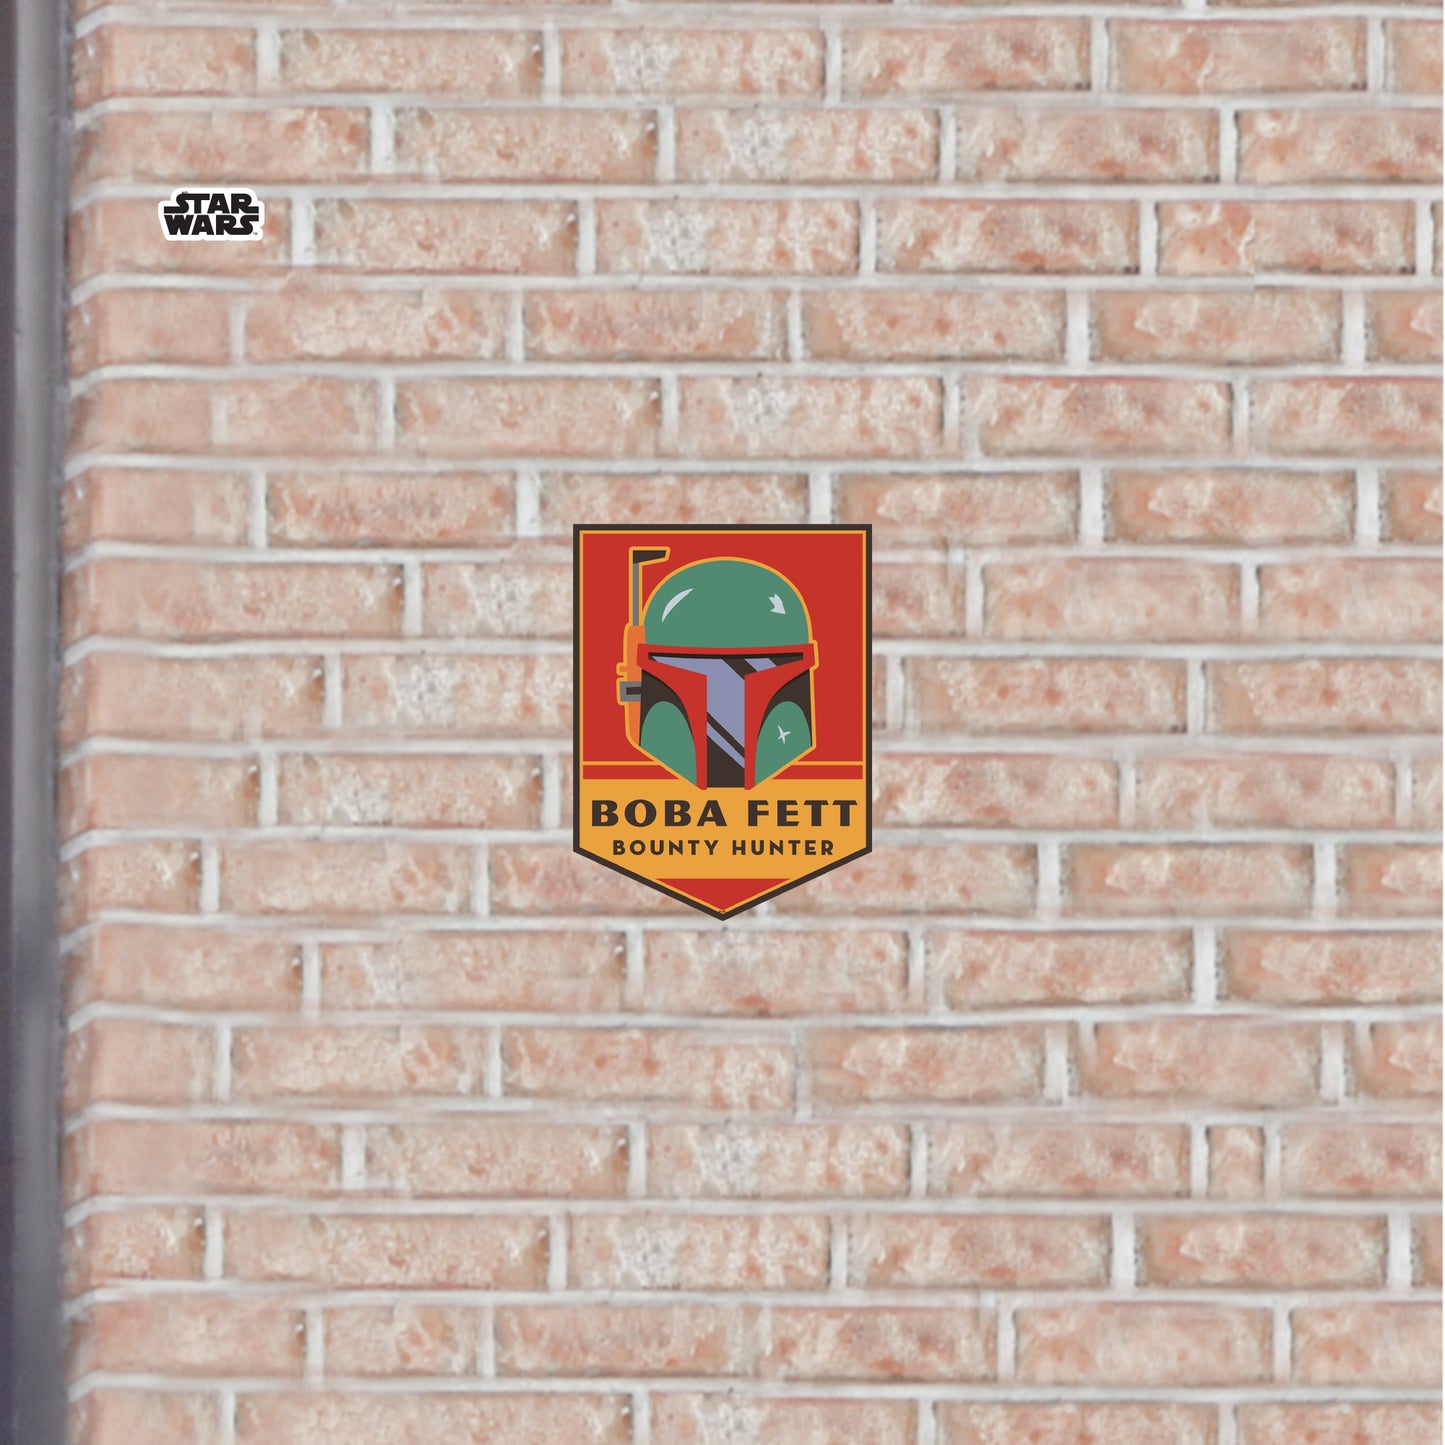 Star Wars: Boba Fett Die-Cut Icon        - Officially Licensed Disney    Outdoor Graphic